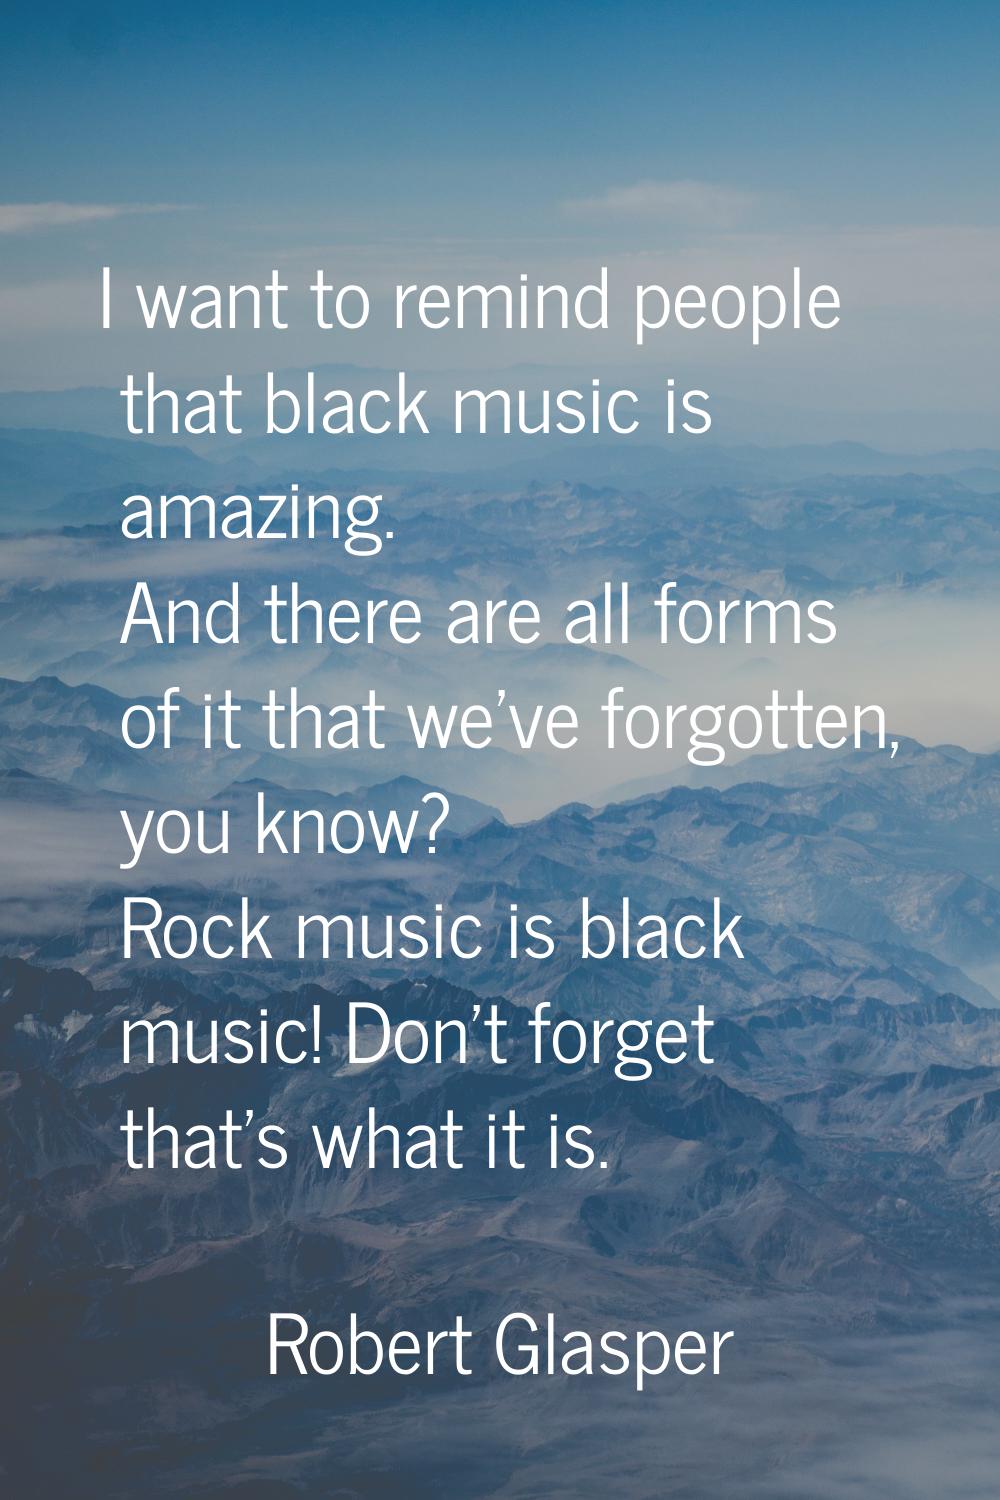 I want to remind people that black music is amazing. And there are all forms of it that we've forgo